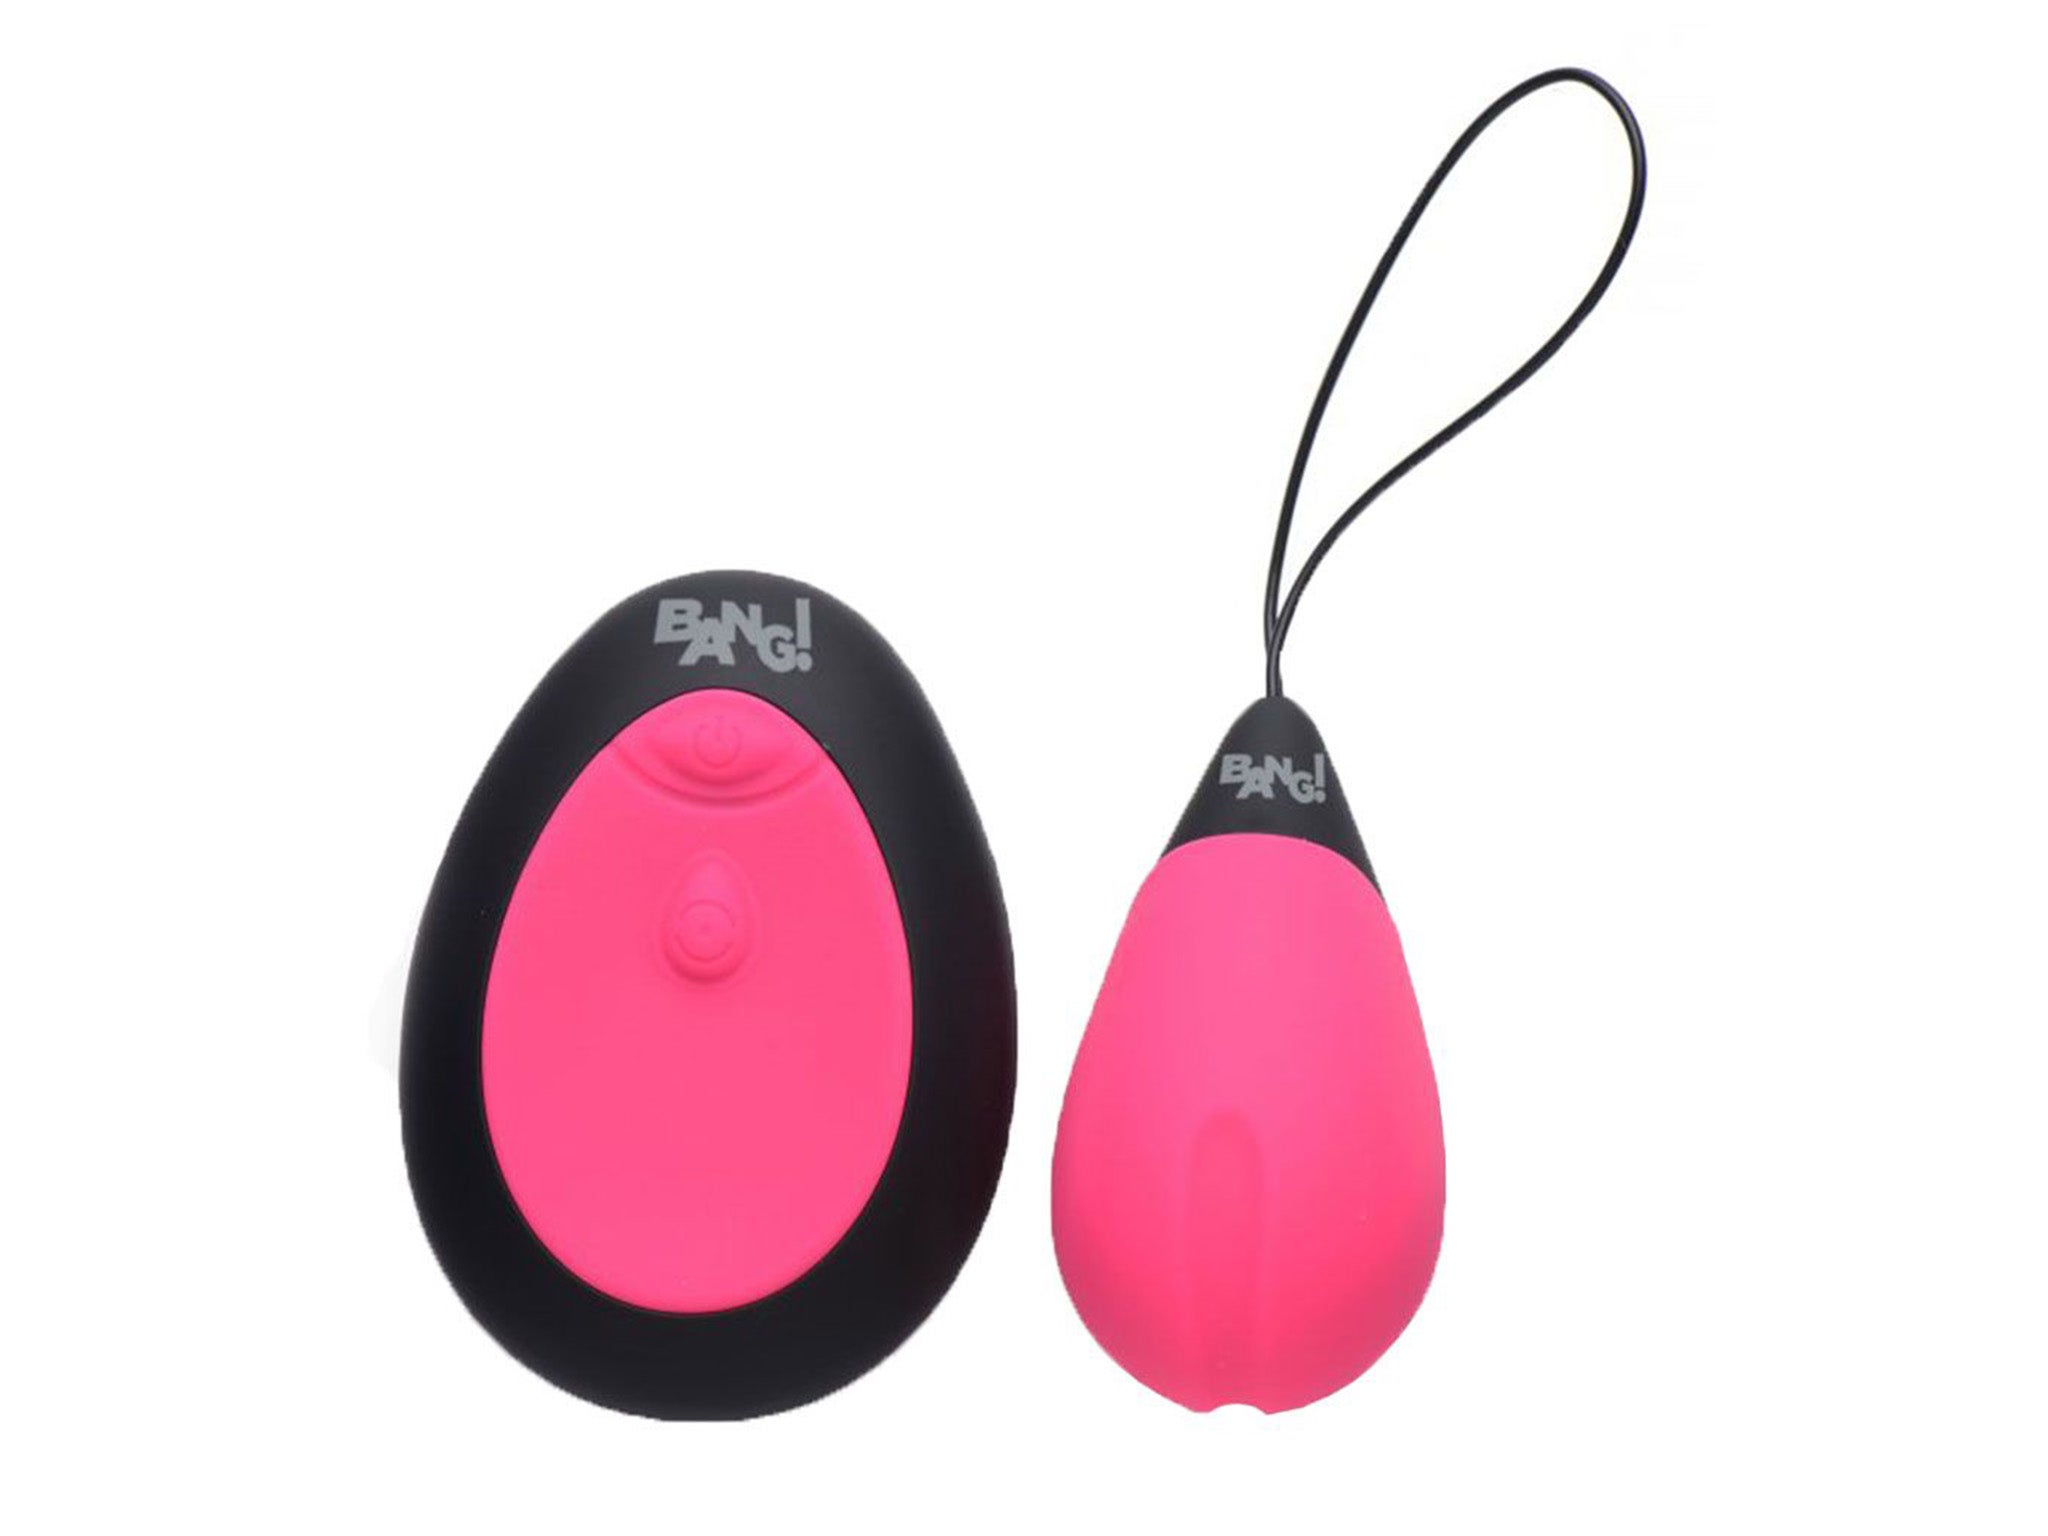 Remote control sex toys are giving new meaning to good vibrations